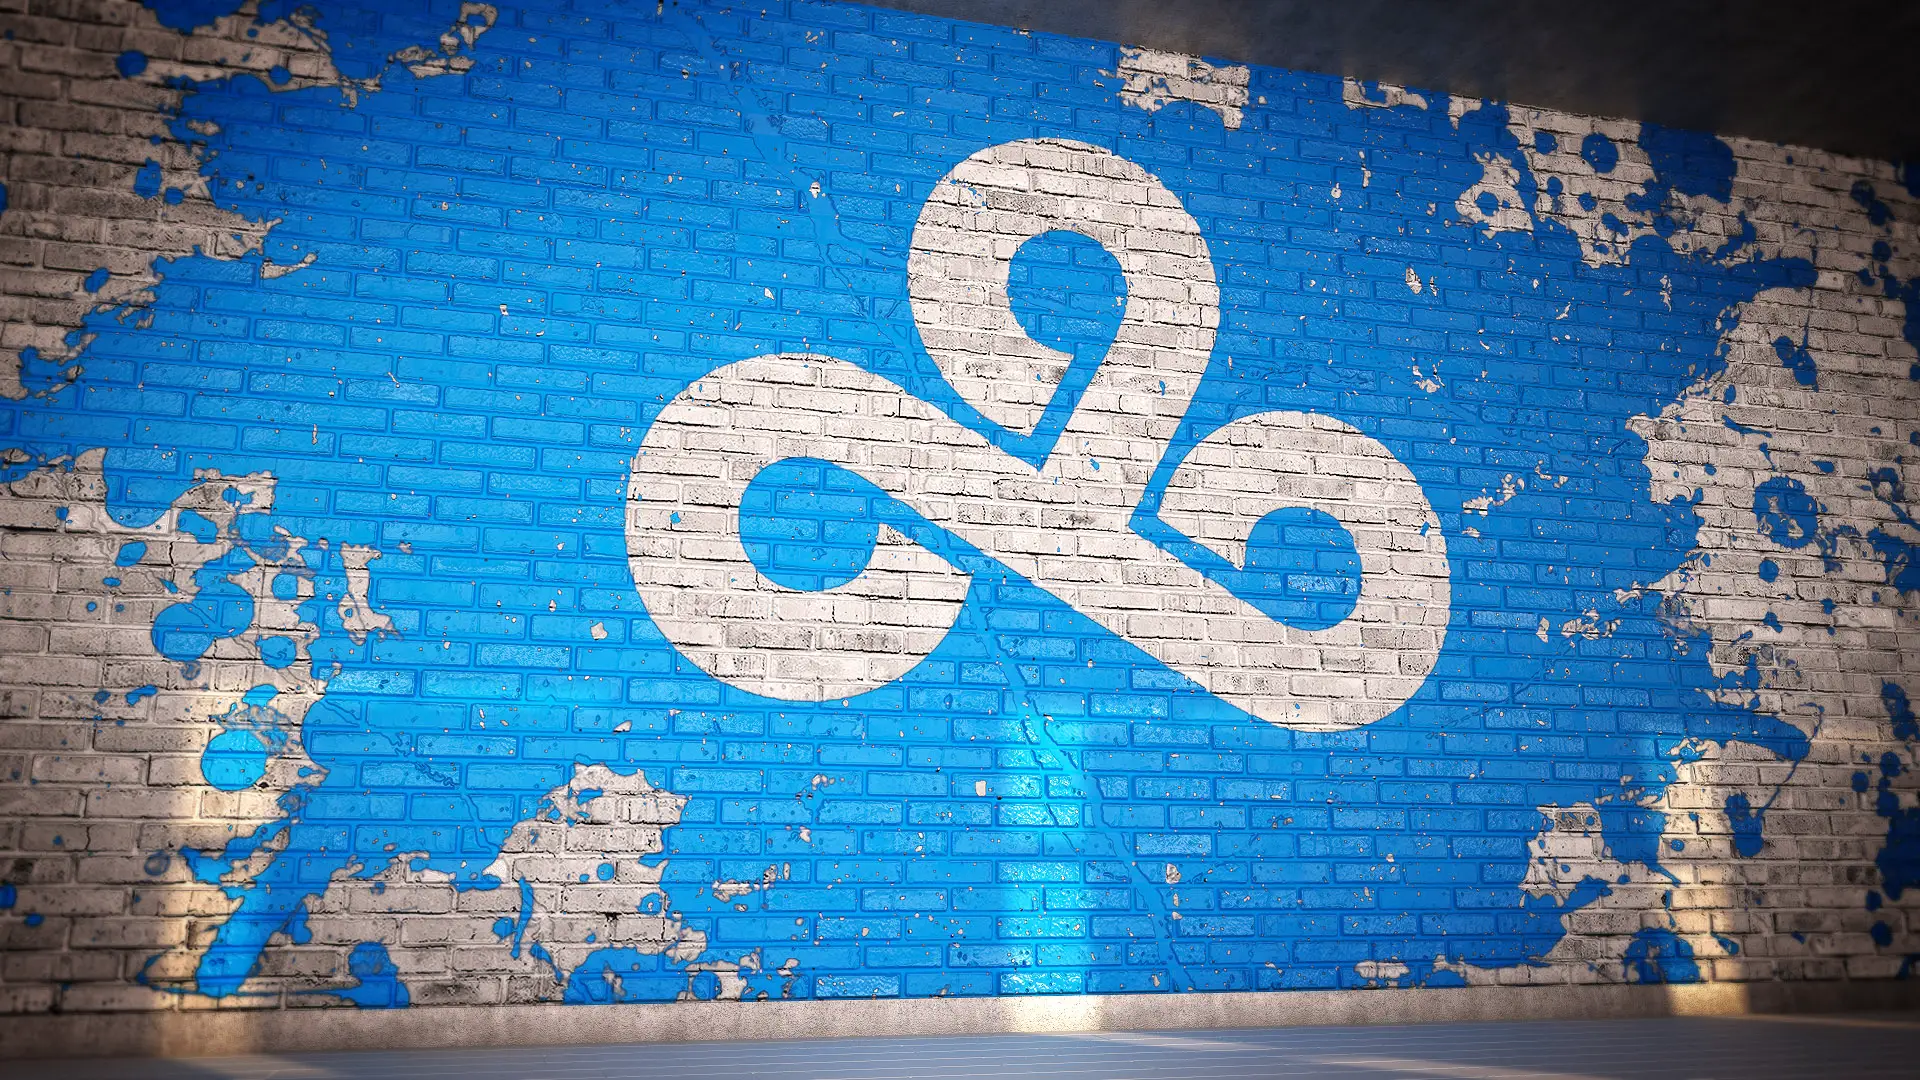 25 Cloud9 Wallpapers - BC-GB